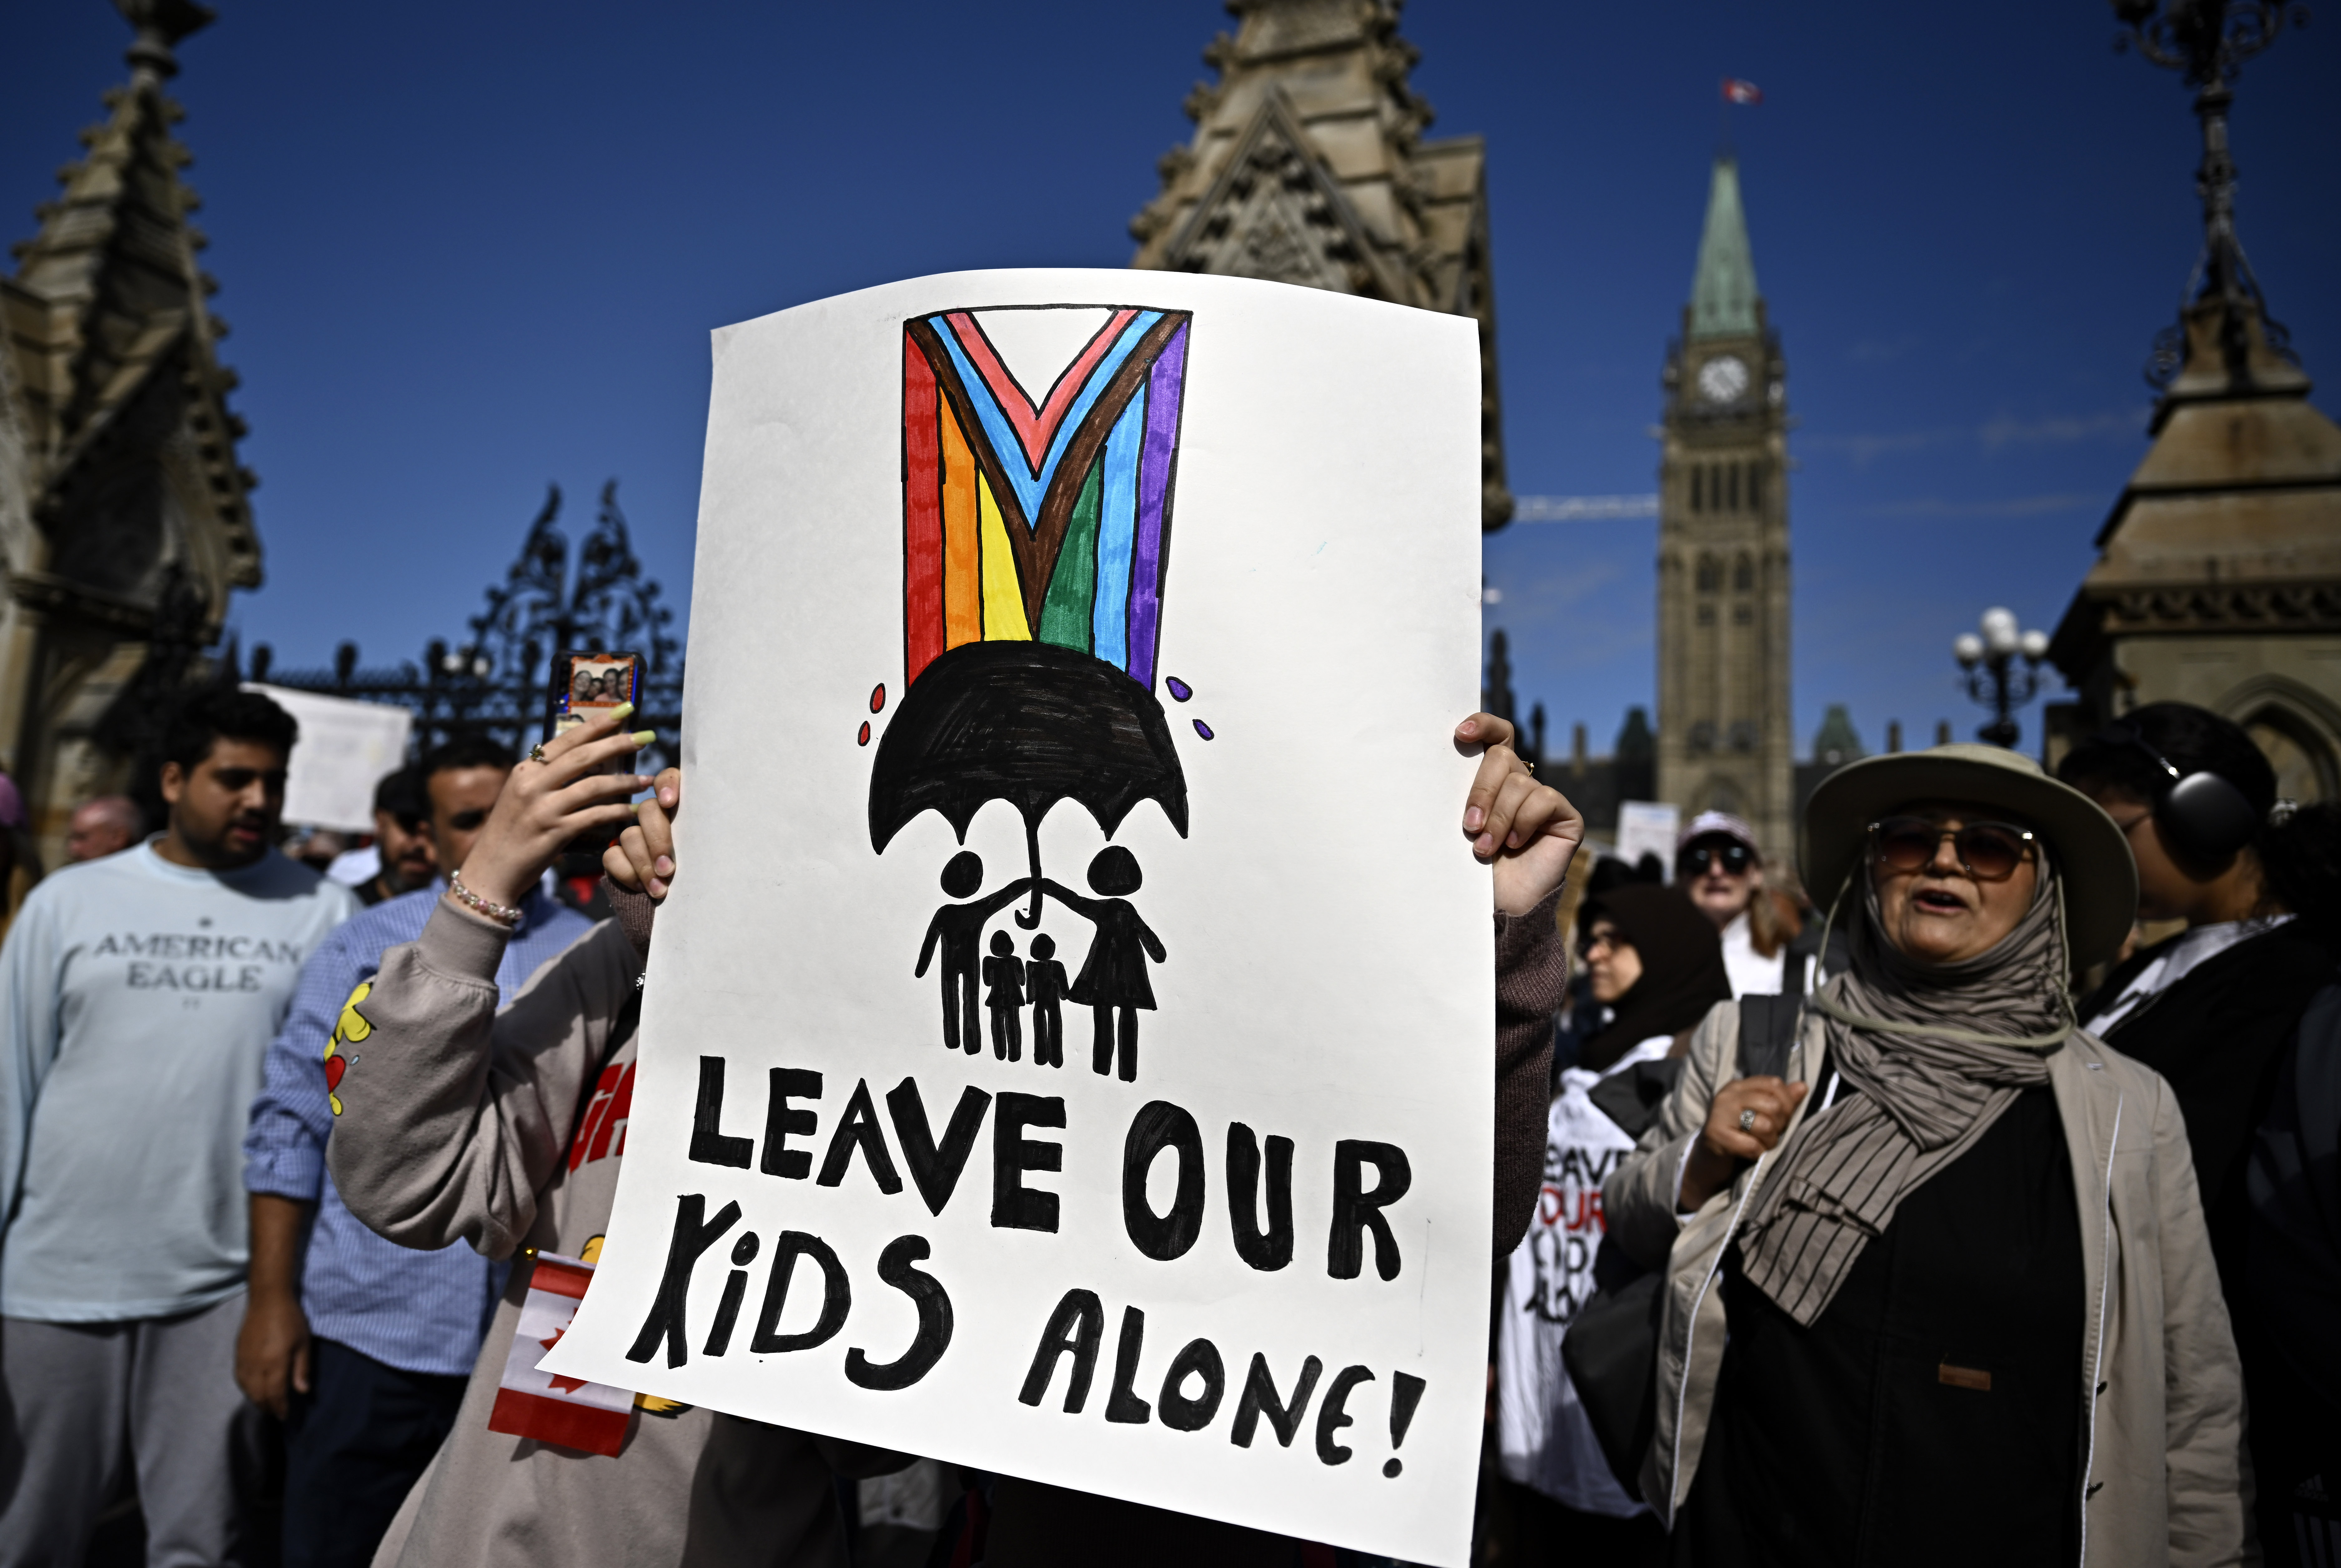 Canadians divided on talk of sexual orientation in schools, poll suggests